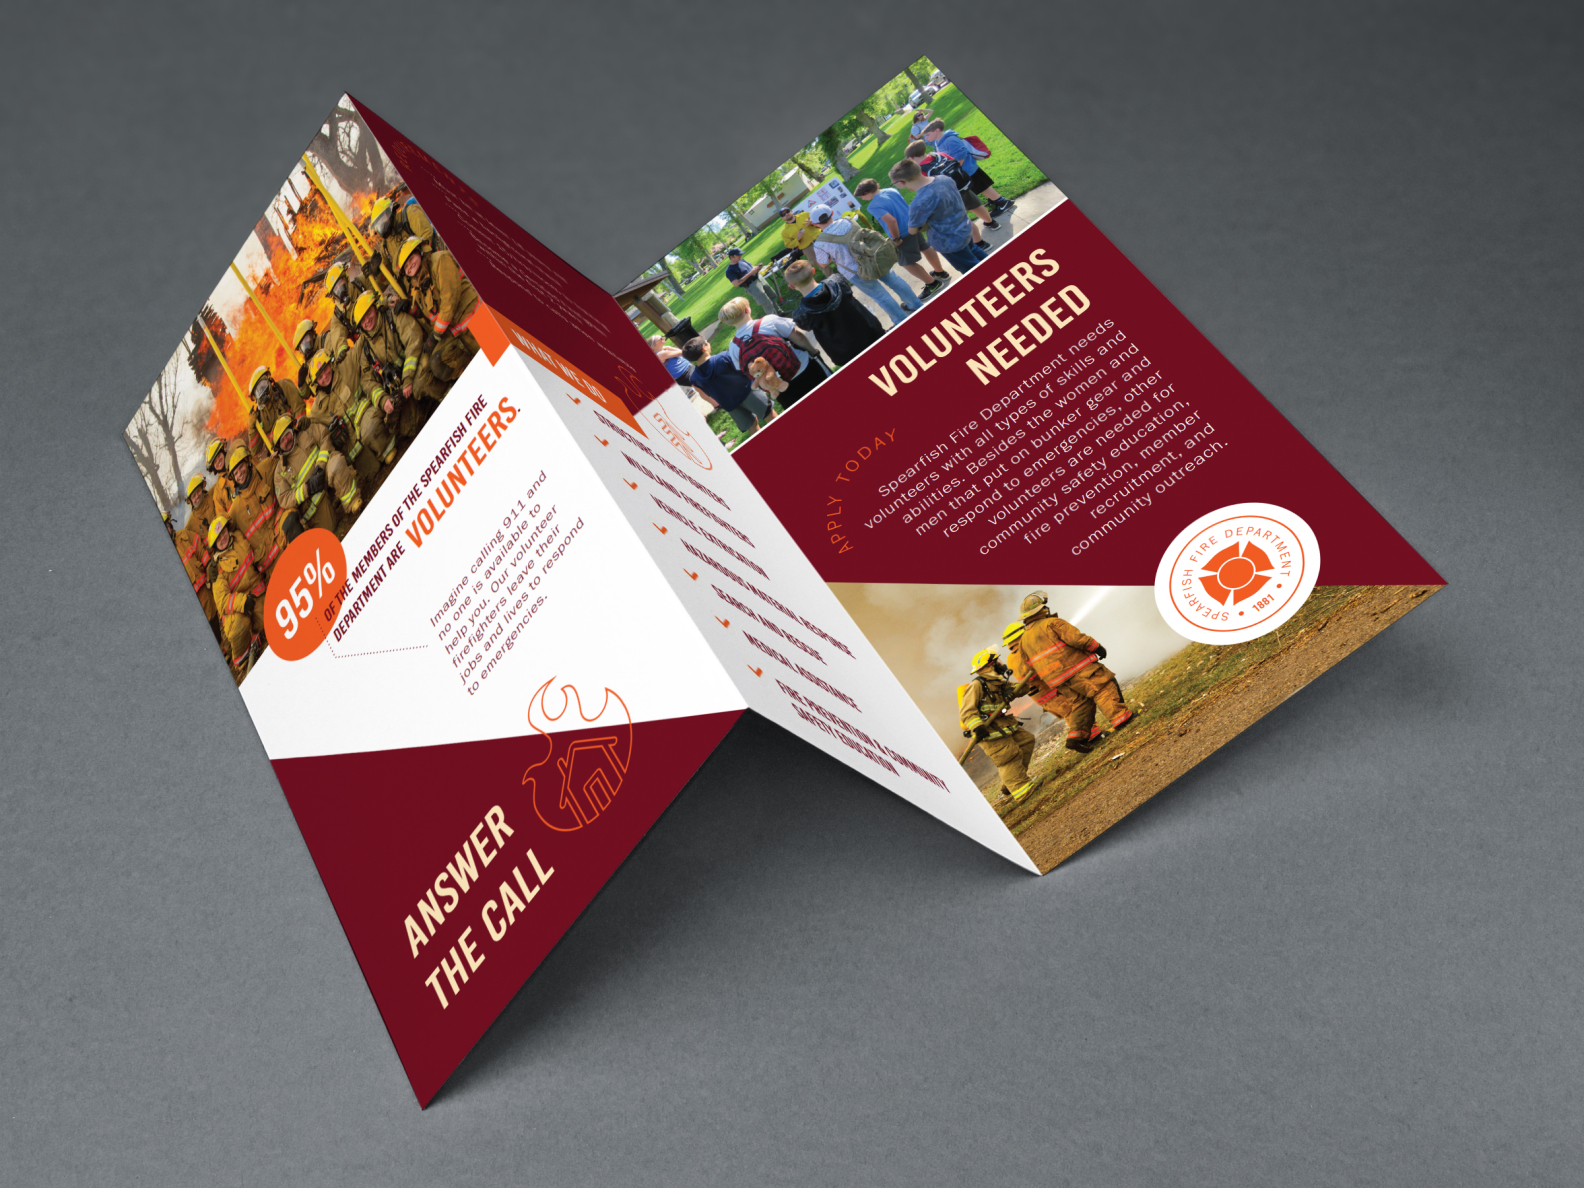 Volunteer Fire Department Brochure by Emily Ashley on Dribbble